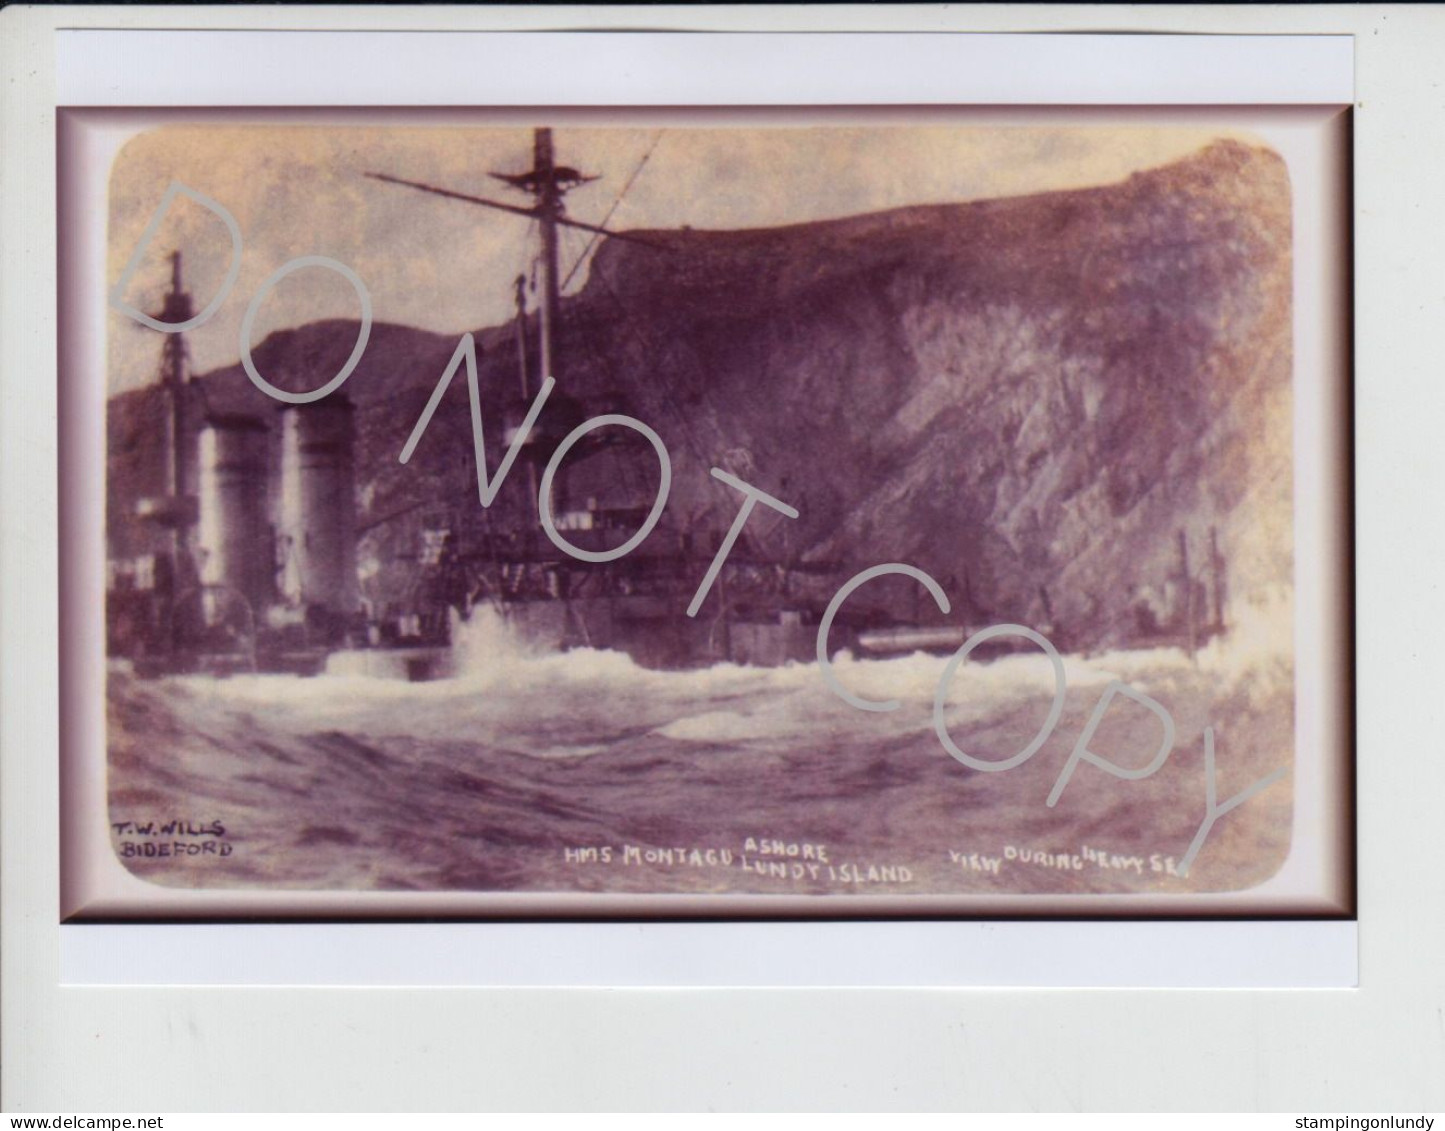 61. WI06. Four Lundy Island HMS Montague/Montagu Warship Produced By Wills Retirment Sale Price Slashed! - Guerre, Militaire